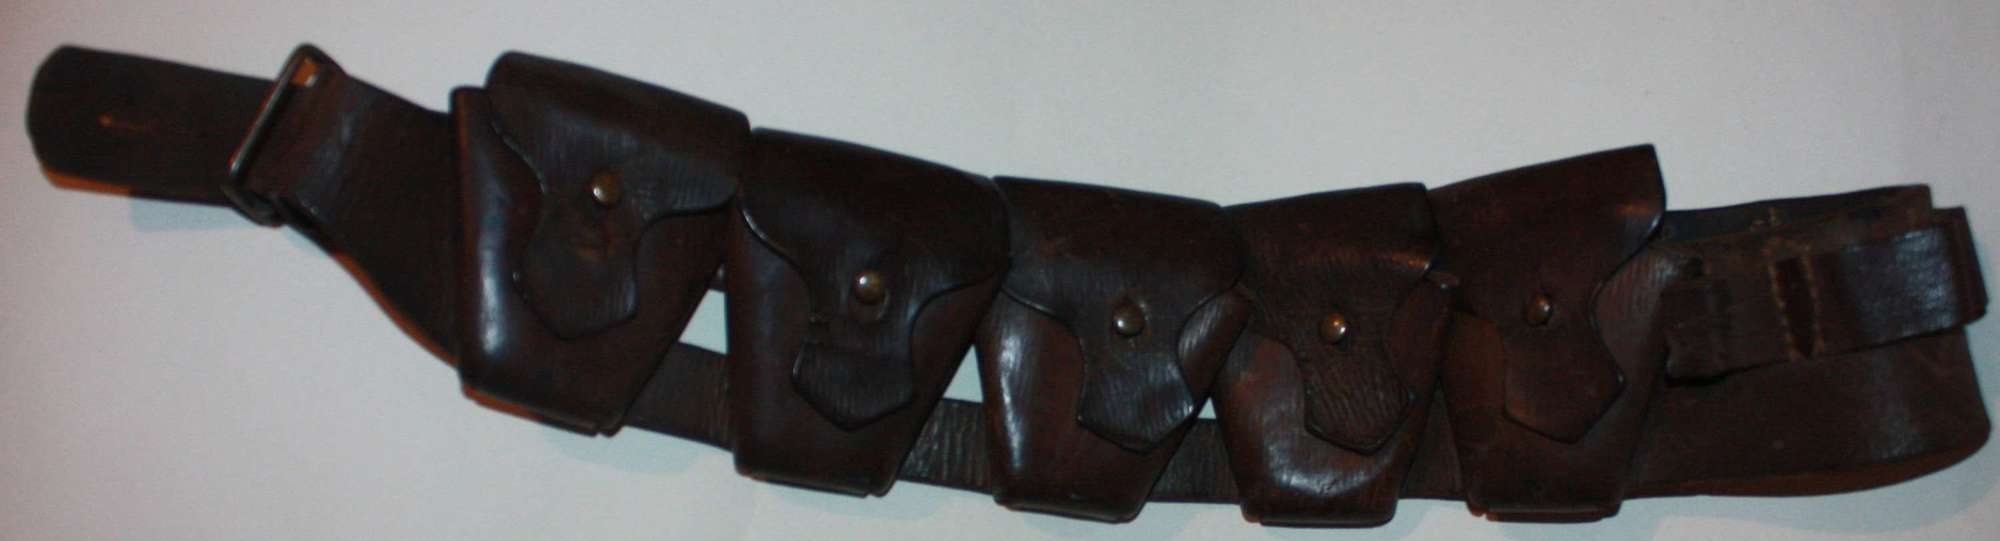 A CONVERTED 03 BANDOLIER  WHICH HAS HAD SHOT GUN LOOPS ADDED TO IT